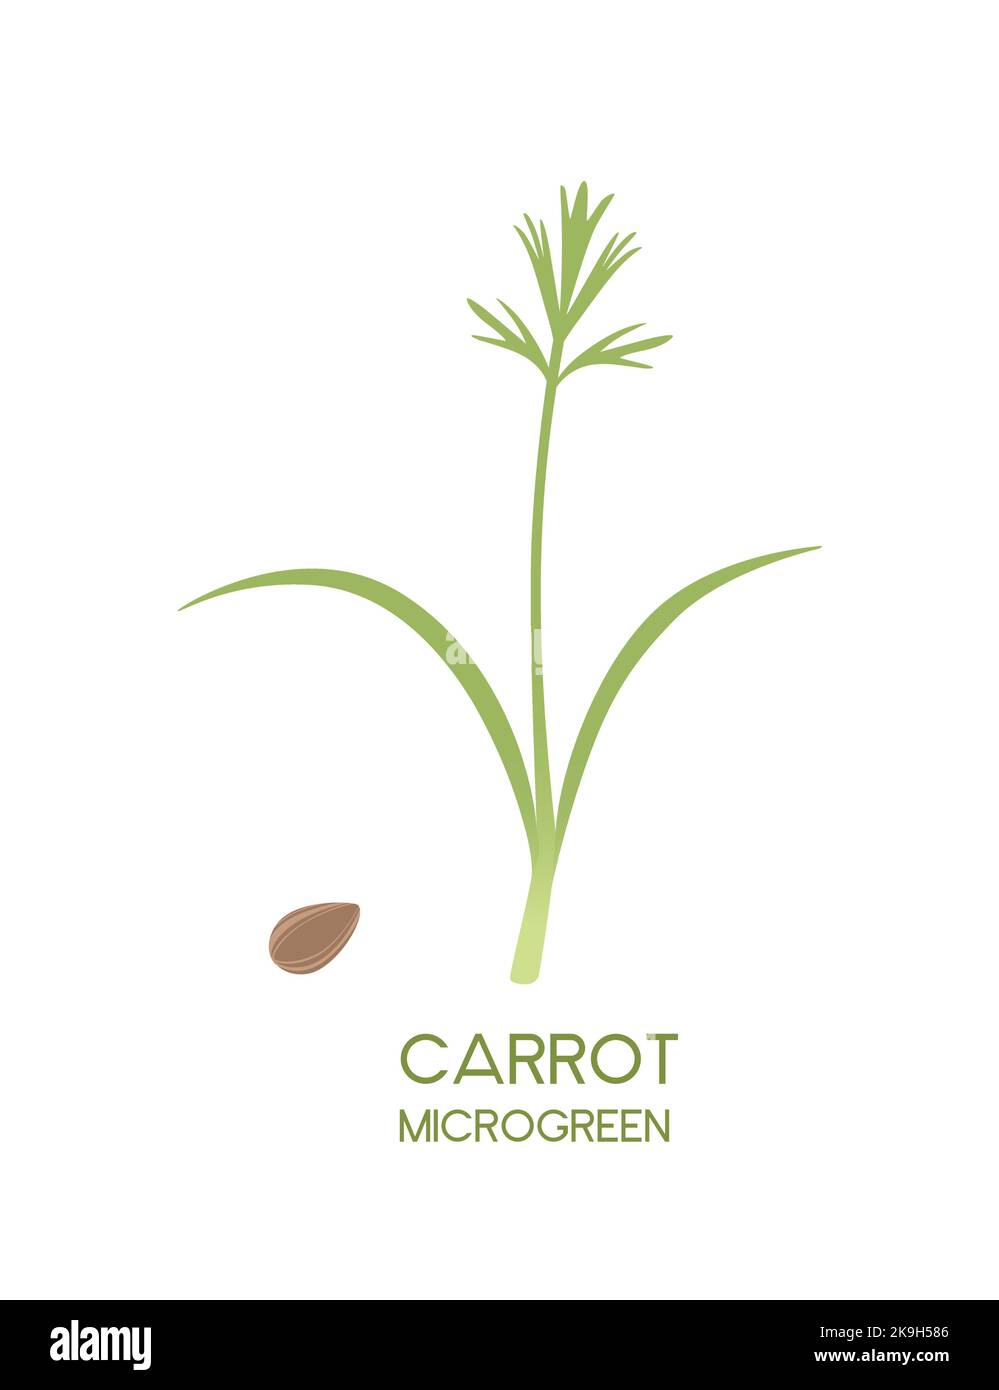 Fresh microgreen superfood sprouts carrot healthy nutrition vector illustration isolated on white background Stock Vector